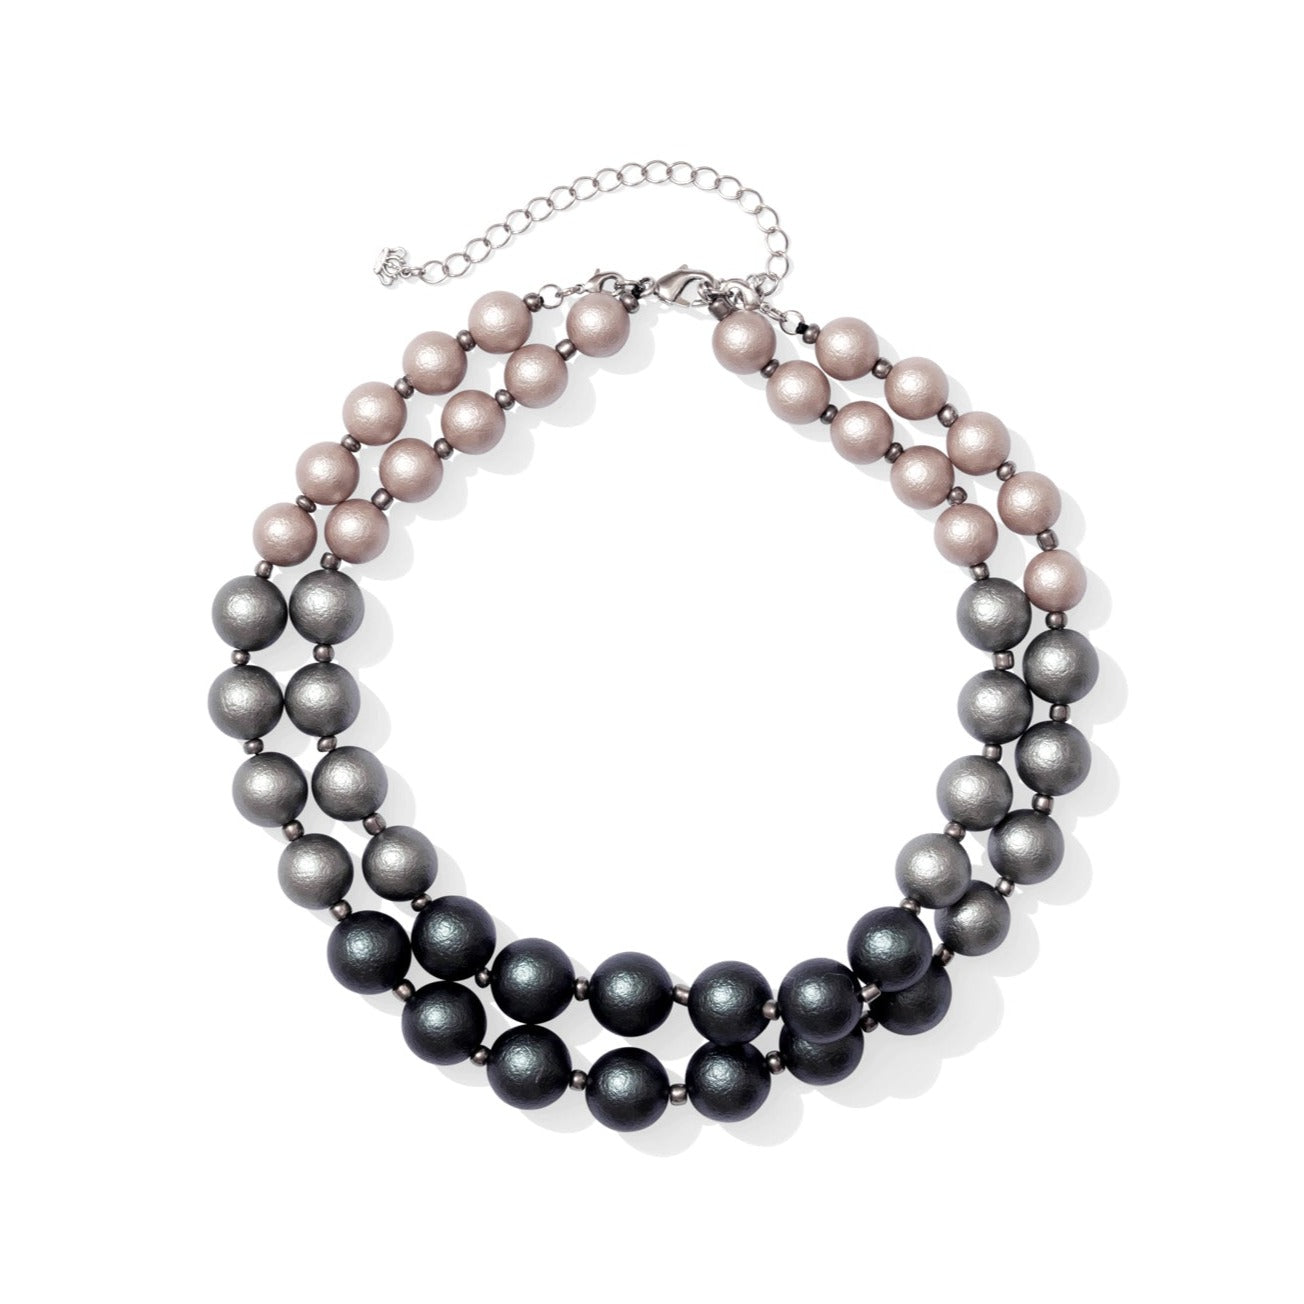 Two flexible length strands of rhodium plated faux pearls in three shades of grey